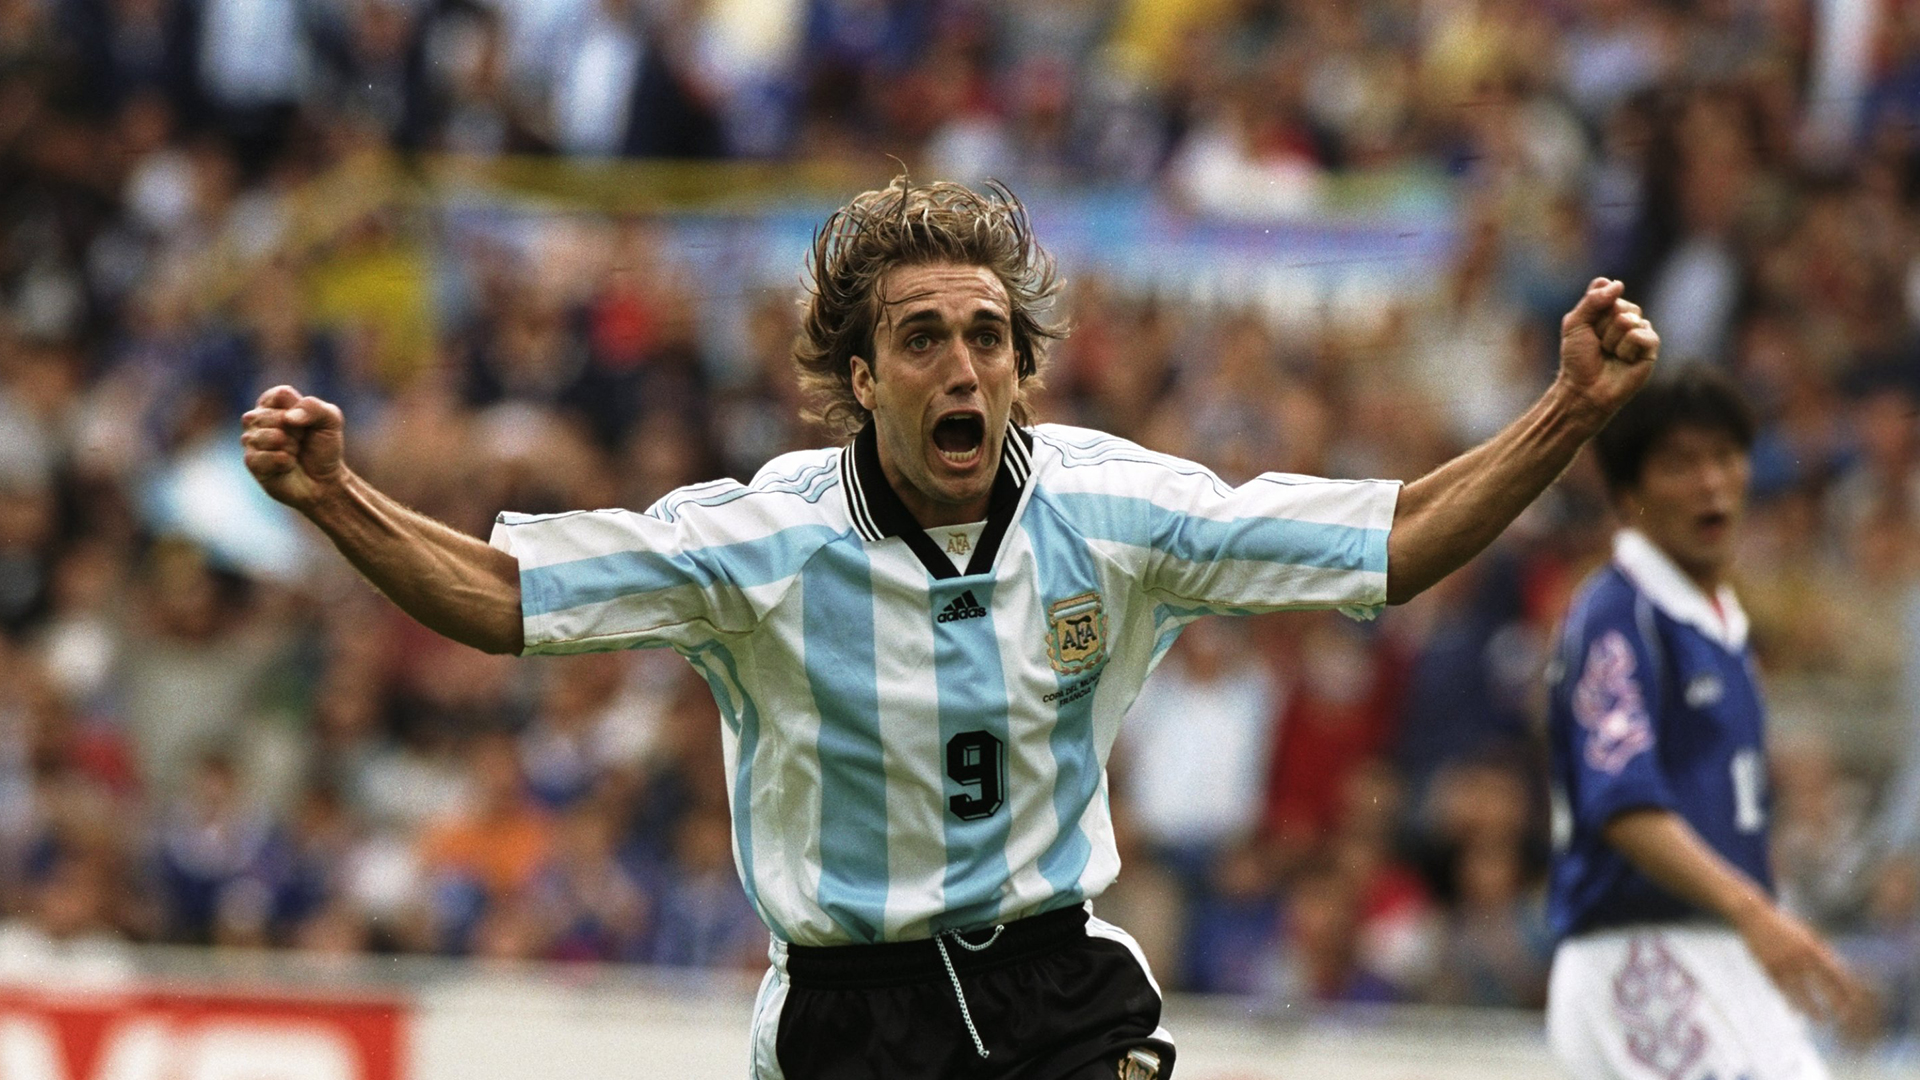 Whatever happened to Batistuta? The Argentine goal machine who begged for his ankles to be amputated